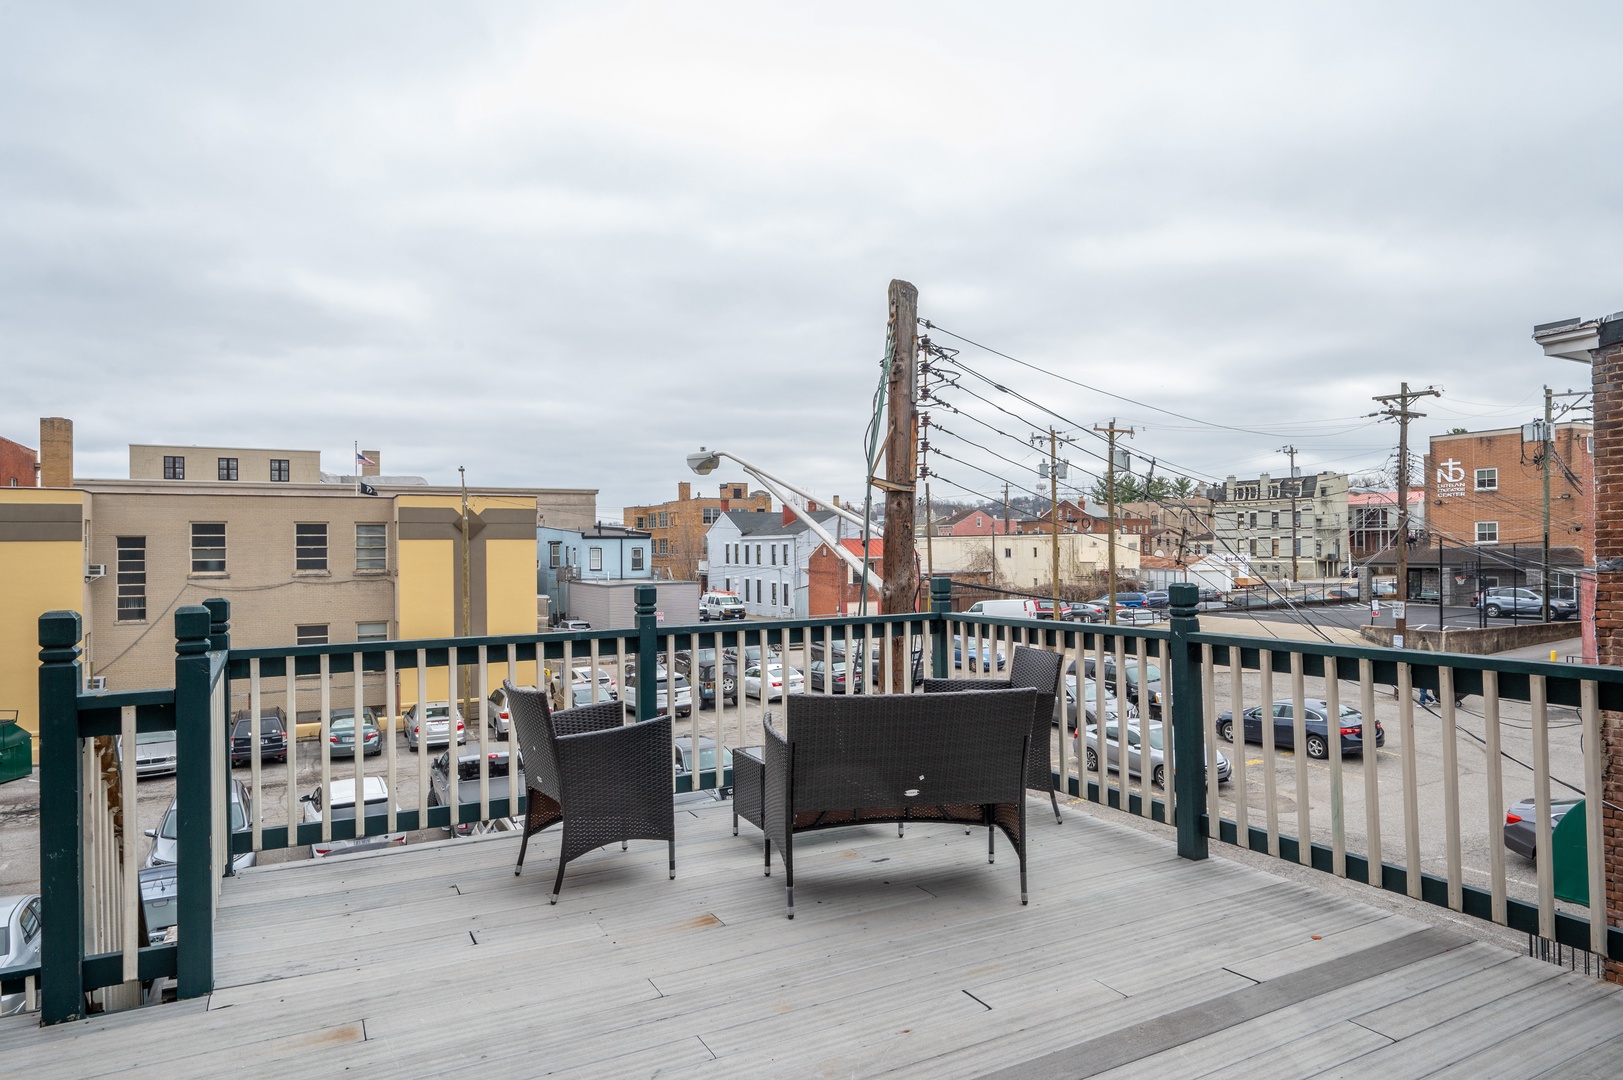 Enjoy views of charming city buildings from the back deck